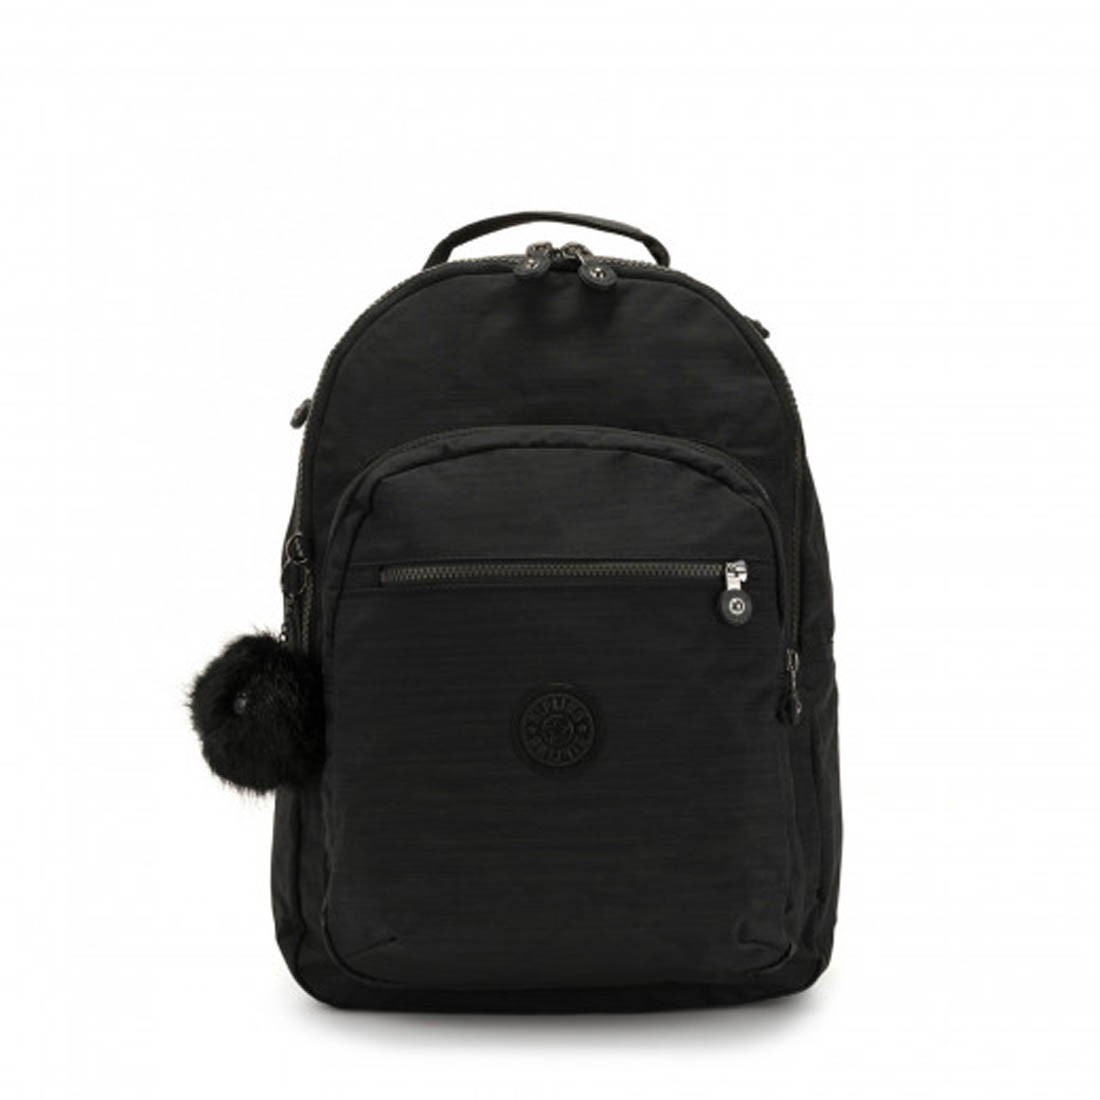 Buy Kipling CLAS SEOUL True Dazz Black - Kipling, delivered to your home |  The Outfit